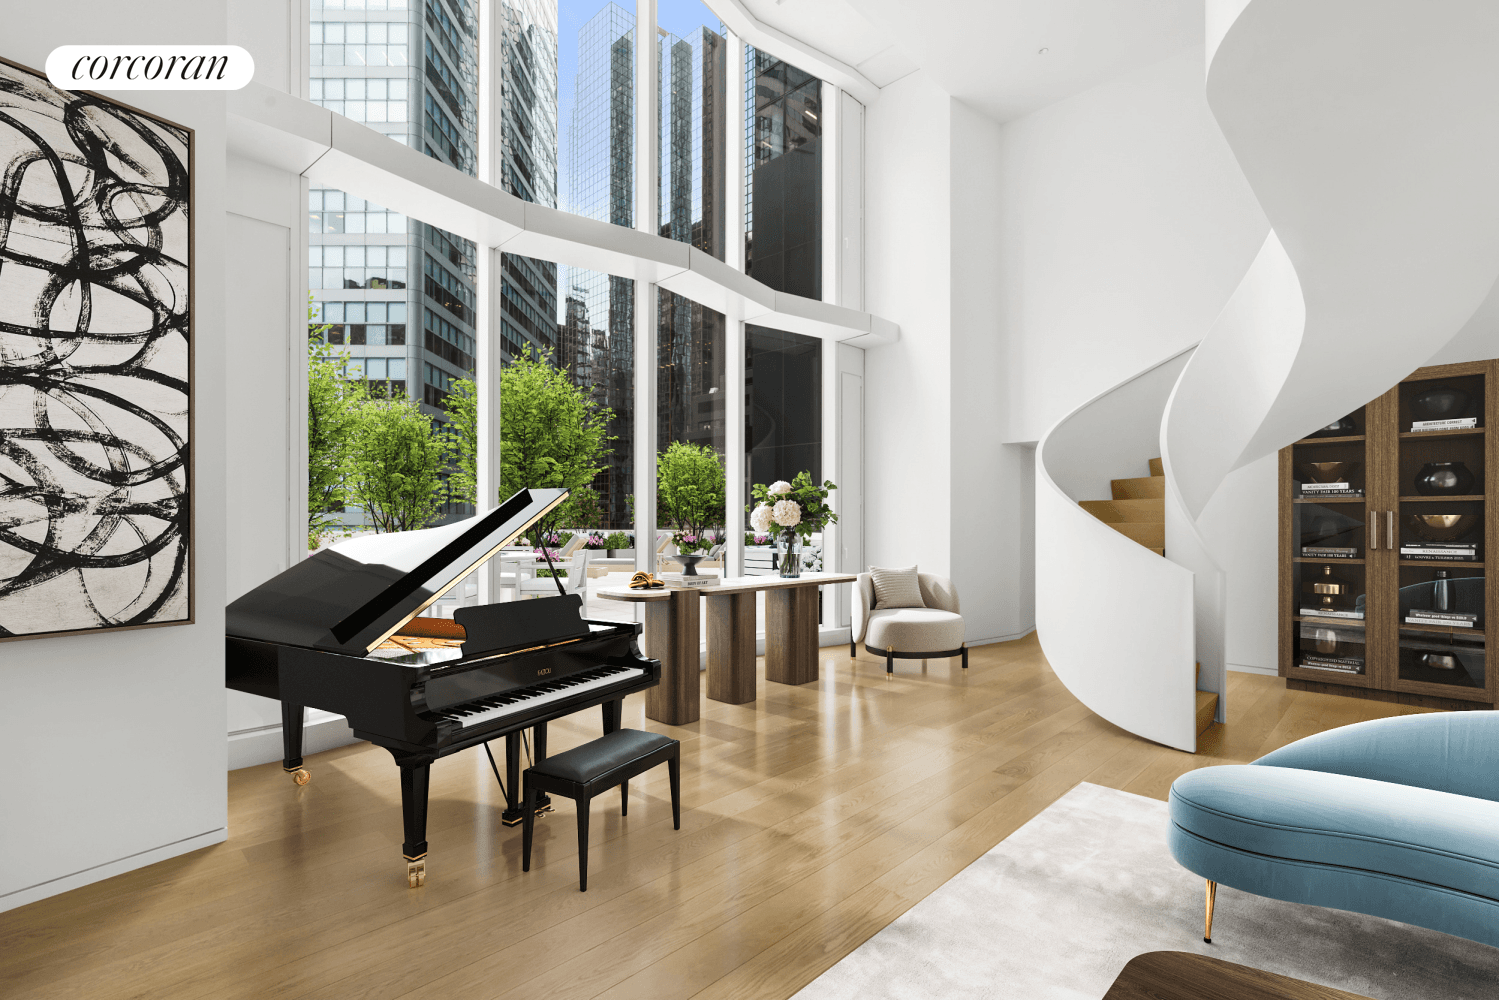 Selene, located at 100 East 53rd Street, offers graciously scaled residences and sophisticated design by renowned architects, Foster Partners with interiors in collaboration with AD100 recipient William T.